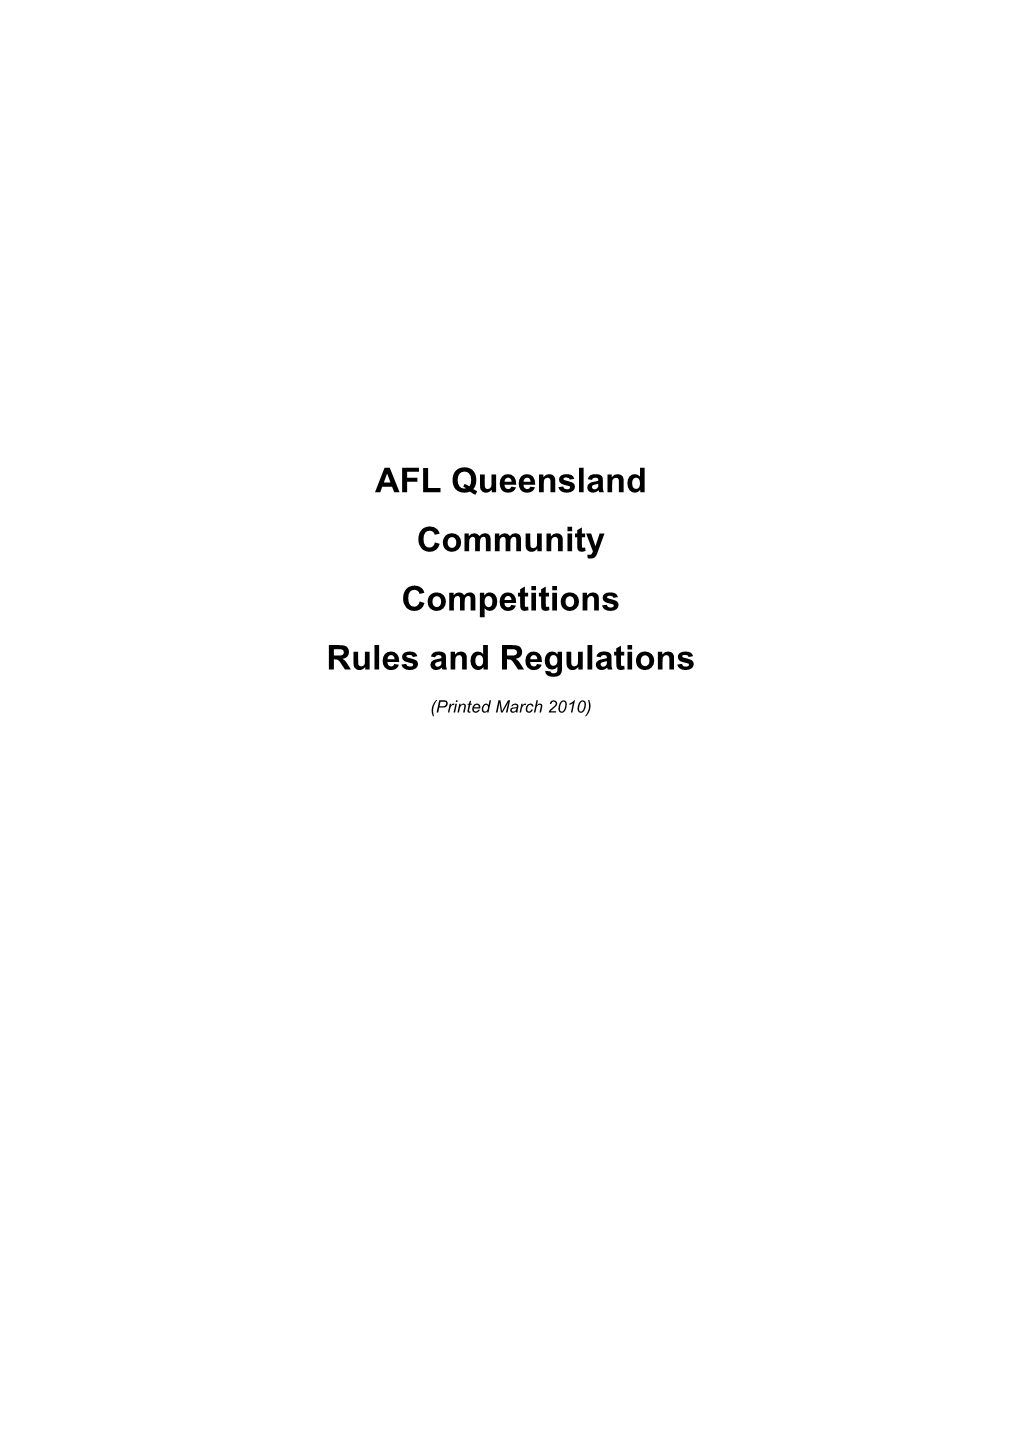 AFL Queensland Community Competitions Rules and Regulations